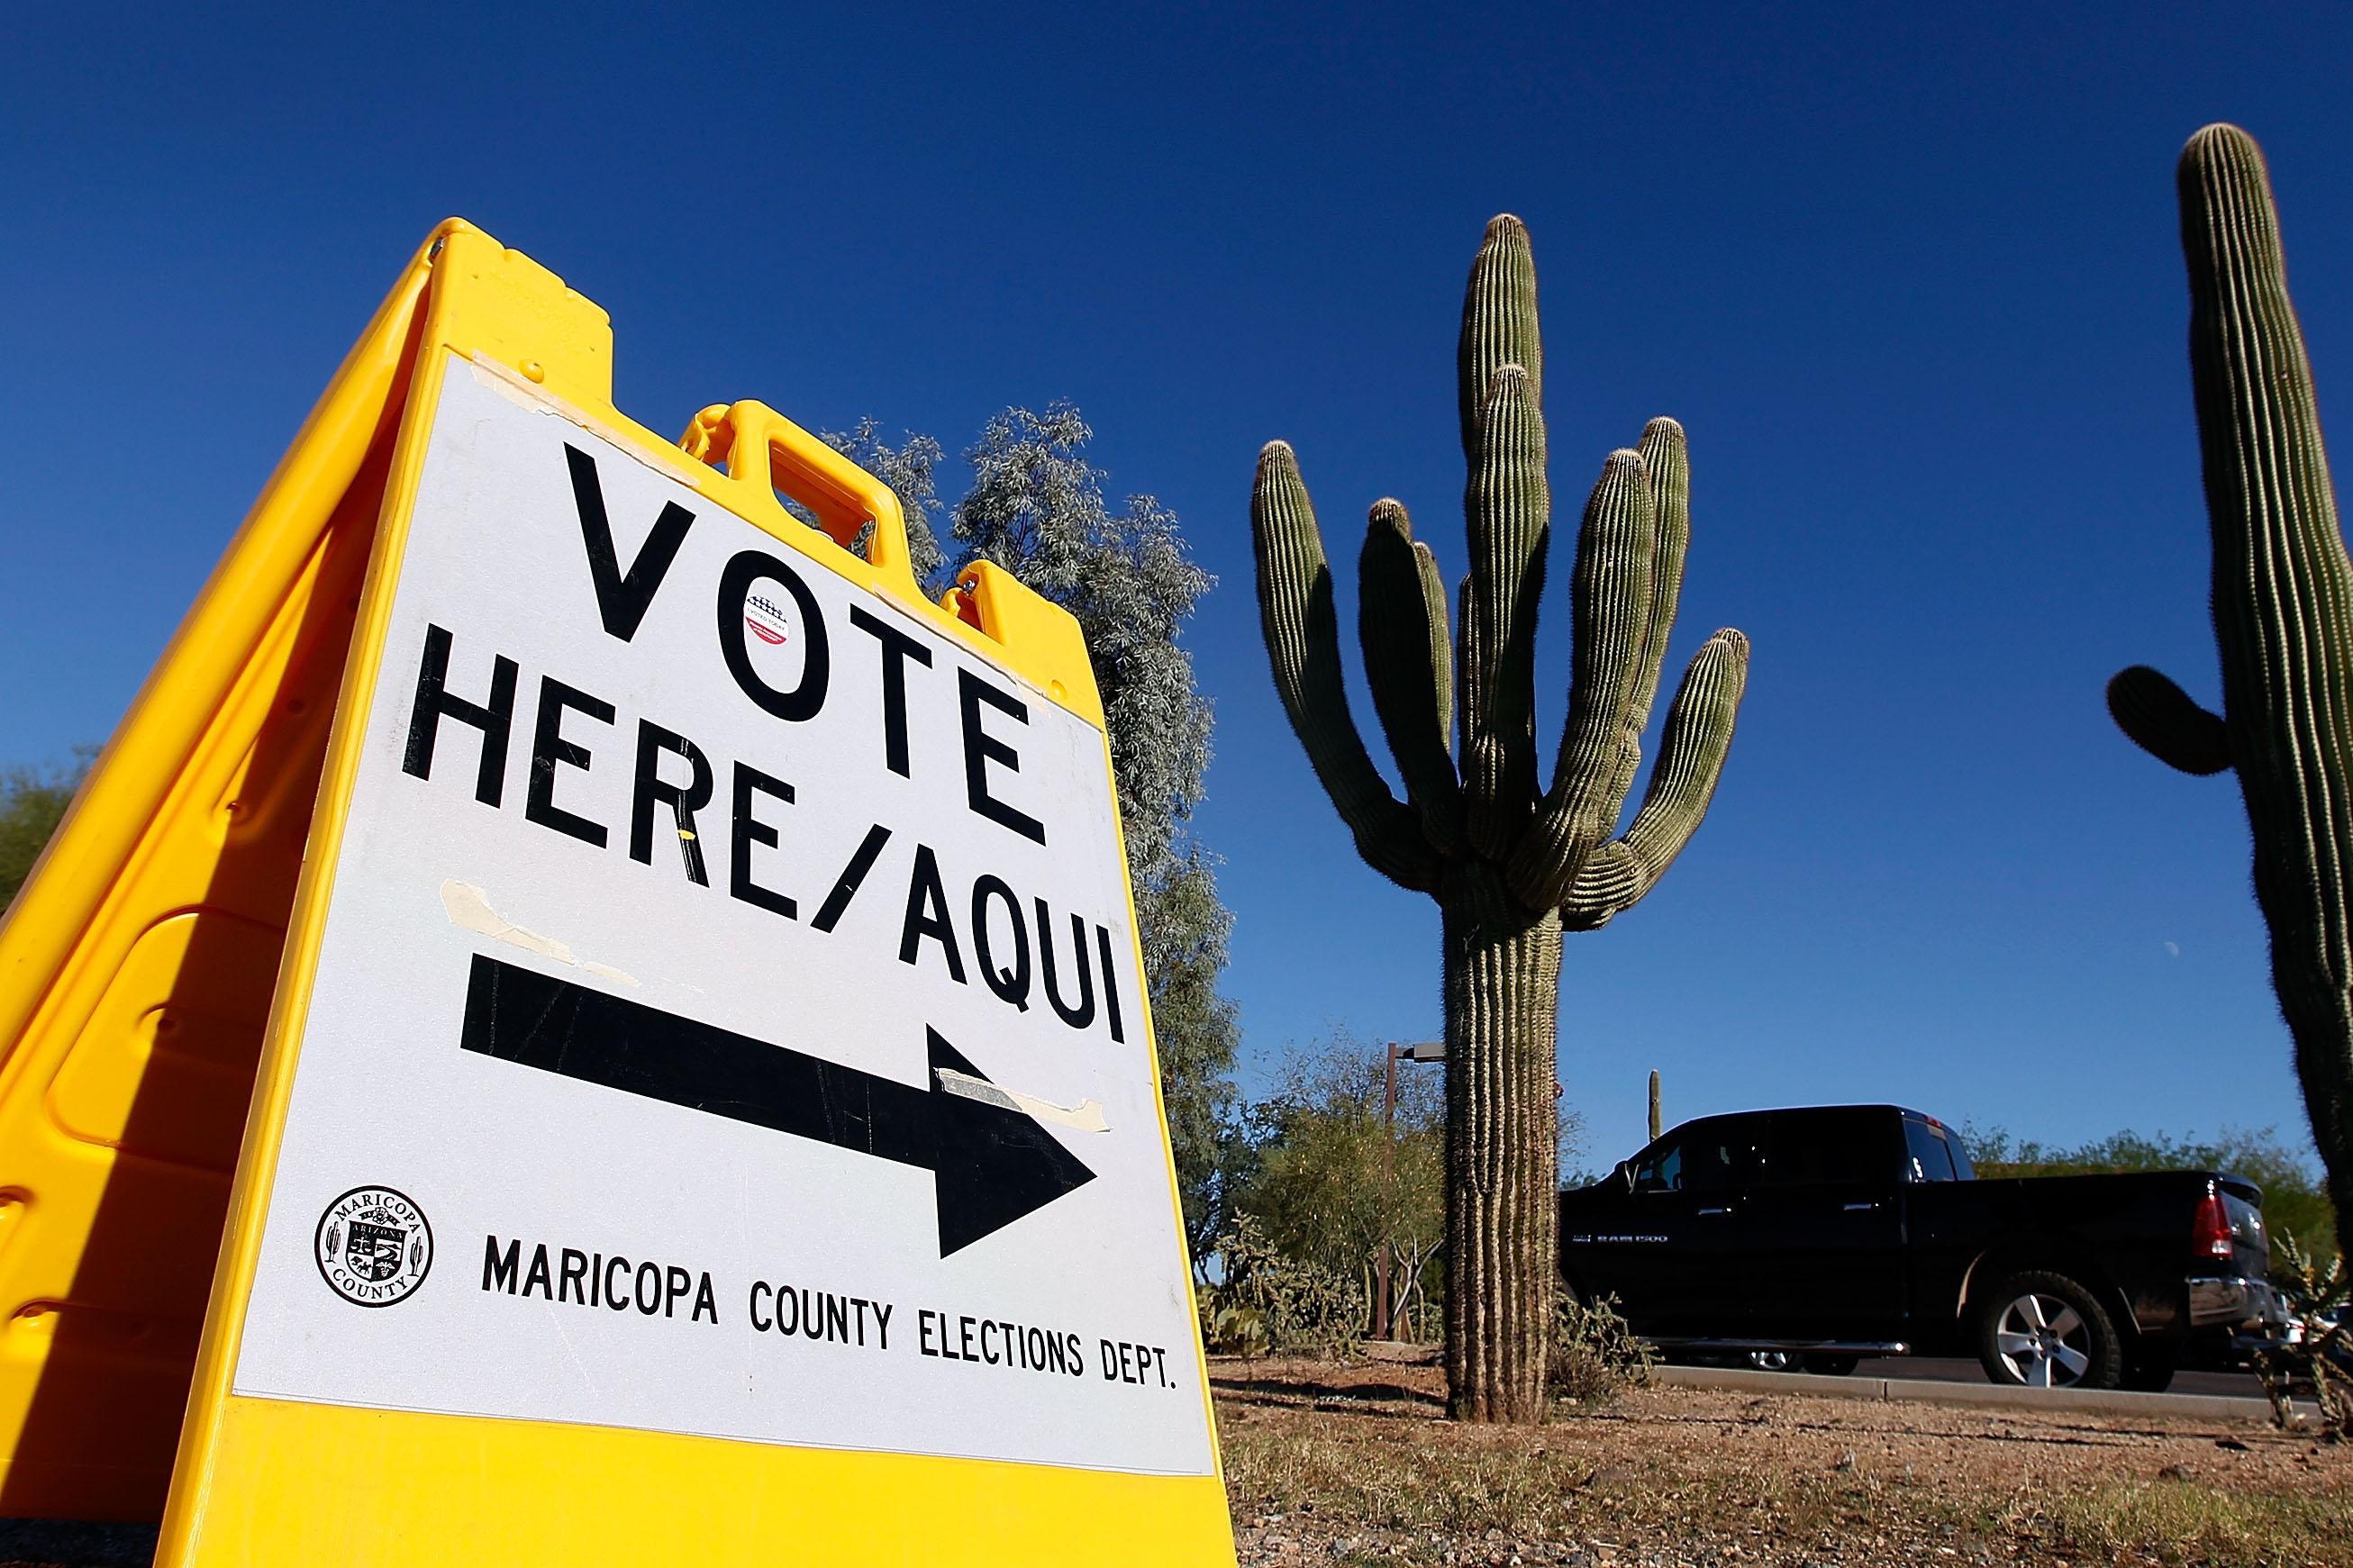 PHOENIX, AZ - NOVEMBER 08:  A Maricopa County Elections Department sign directs voters to a polling station on November 8, 2016 in Cave Creek, Arizona. Throughout the country, millions of Americans are casting their votes today for either Hillary Clinton or Donald Trump to become the 45th president of the United States.  (Photo by Ralph Freso/Getty Images)